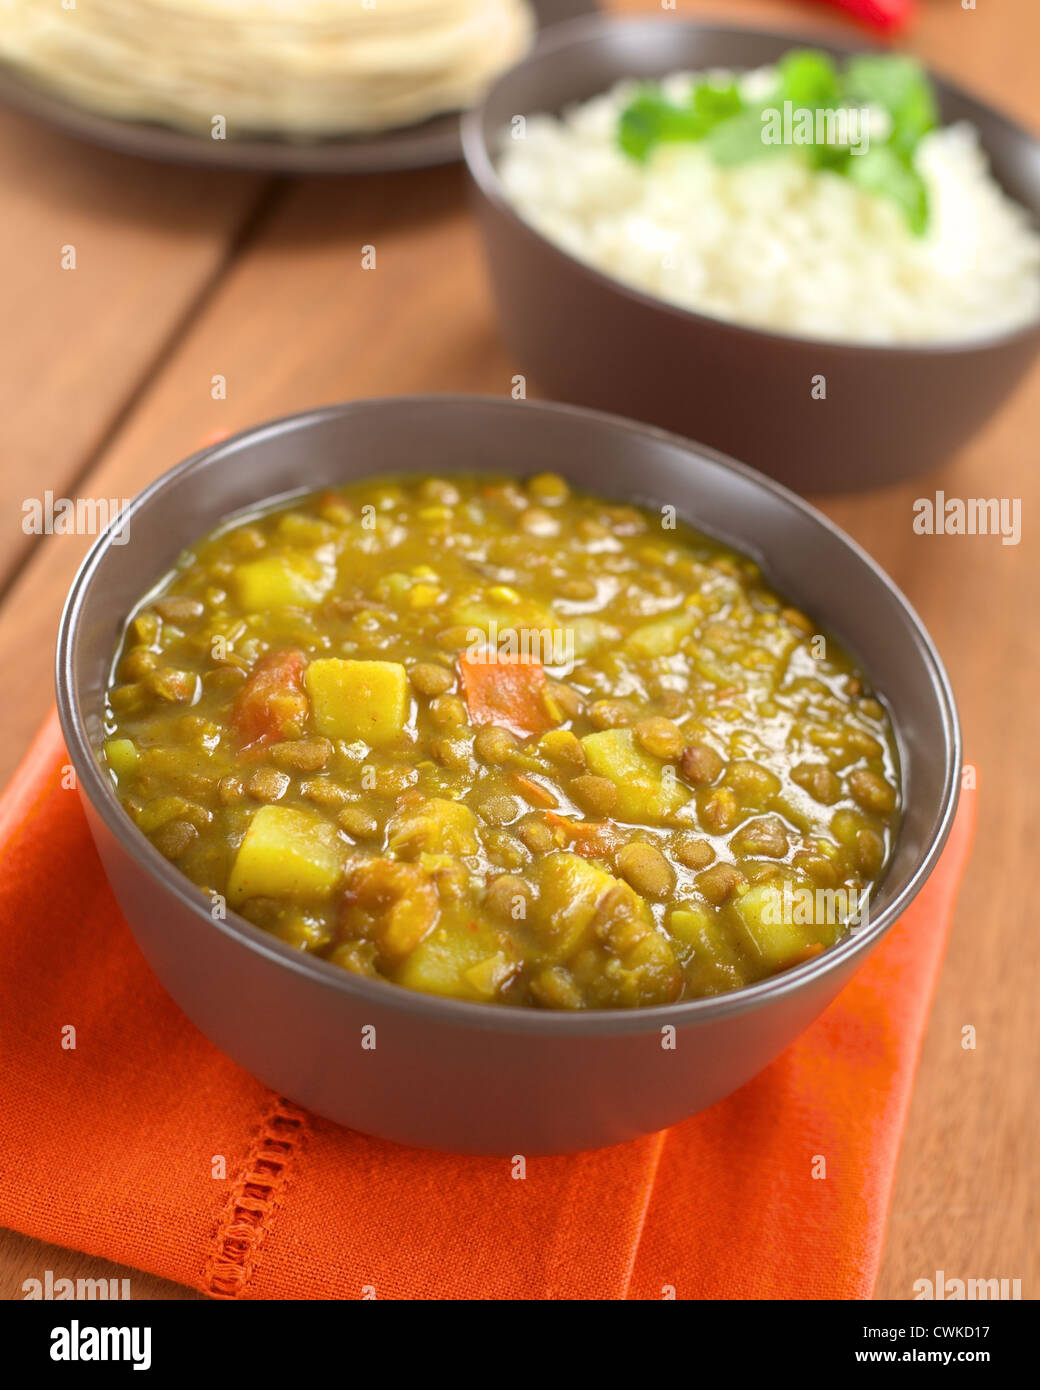 Bowl of spicy Indian dal (lentil) curry prepared with carrot and potato ...